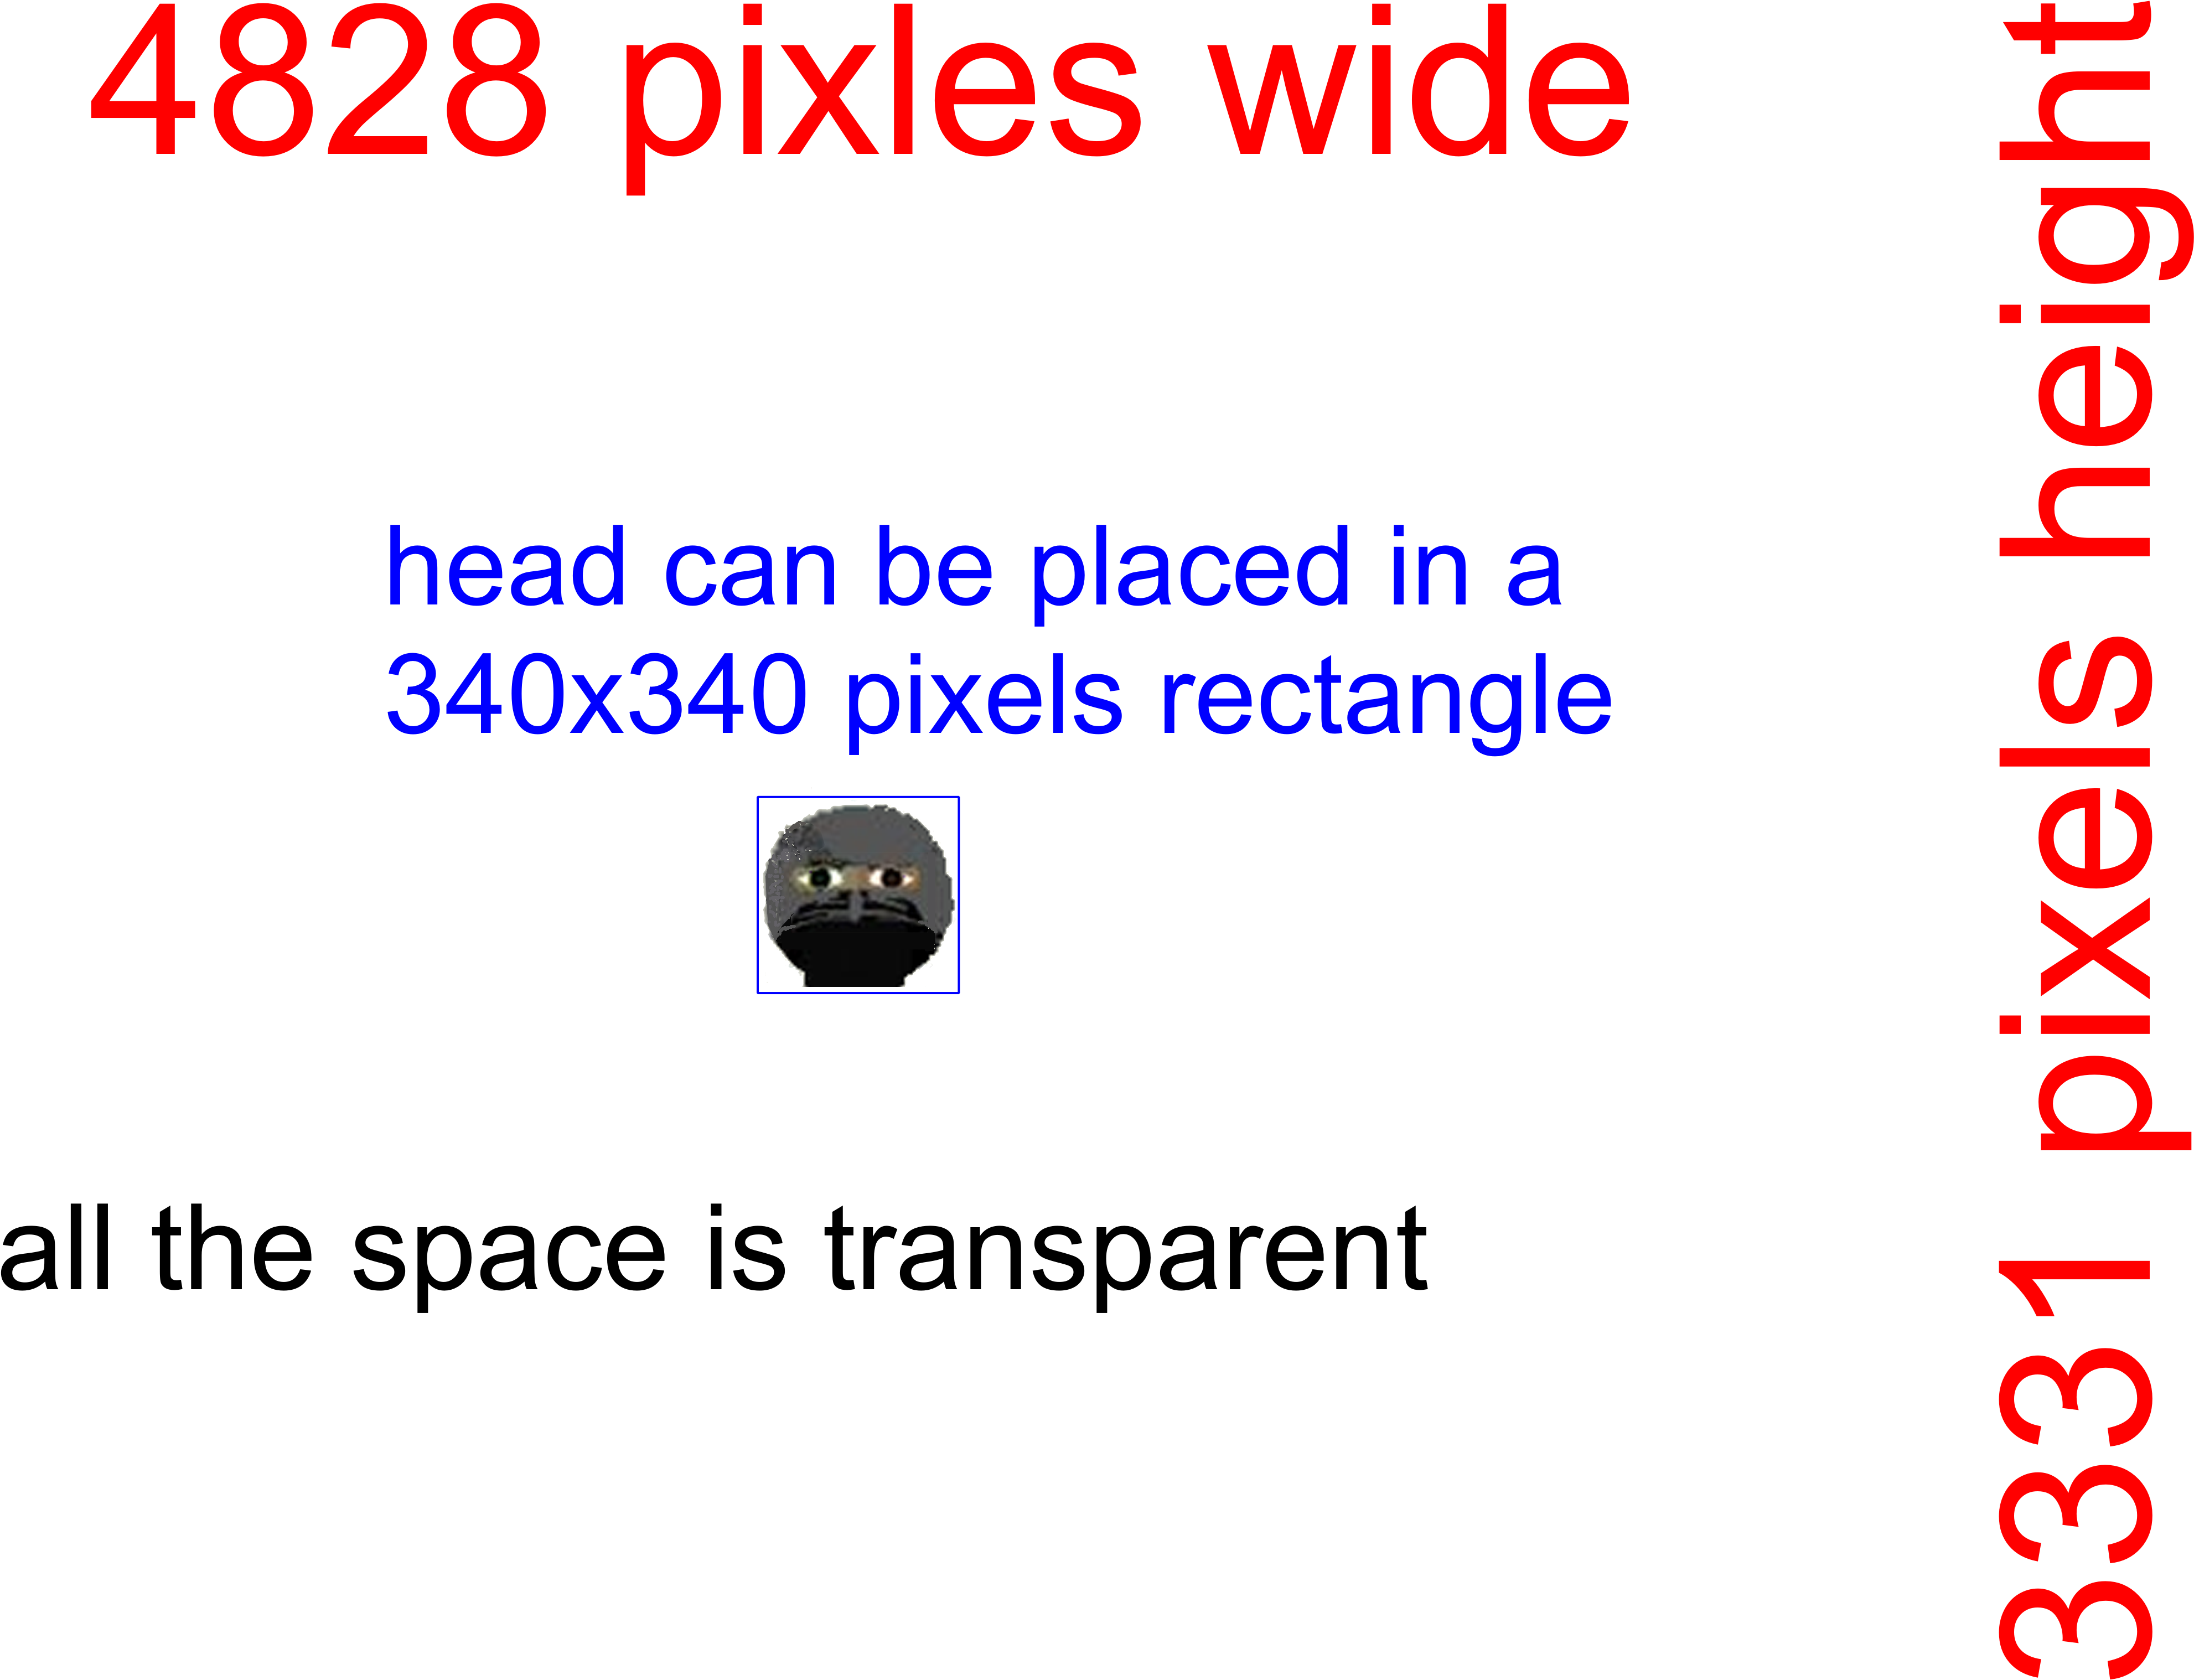 This Is The Ninja Head Image File With Some Text Onto - All Rights Reserved Symbol (4828x3331), Png Download